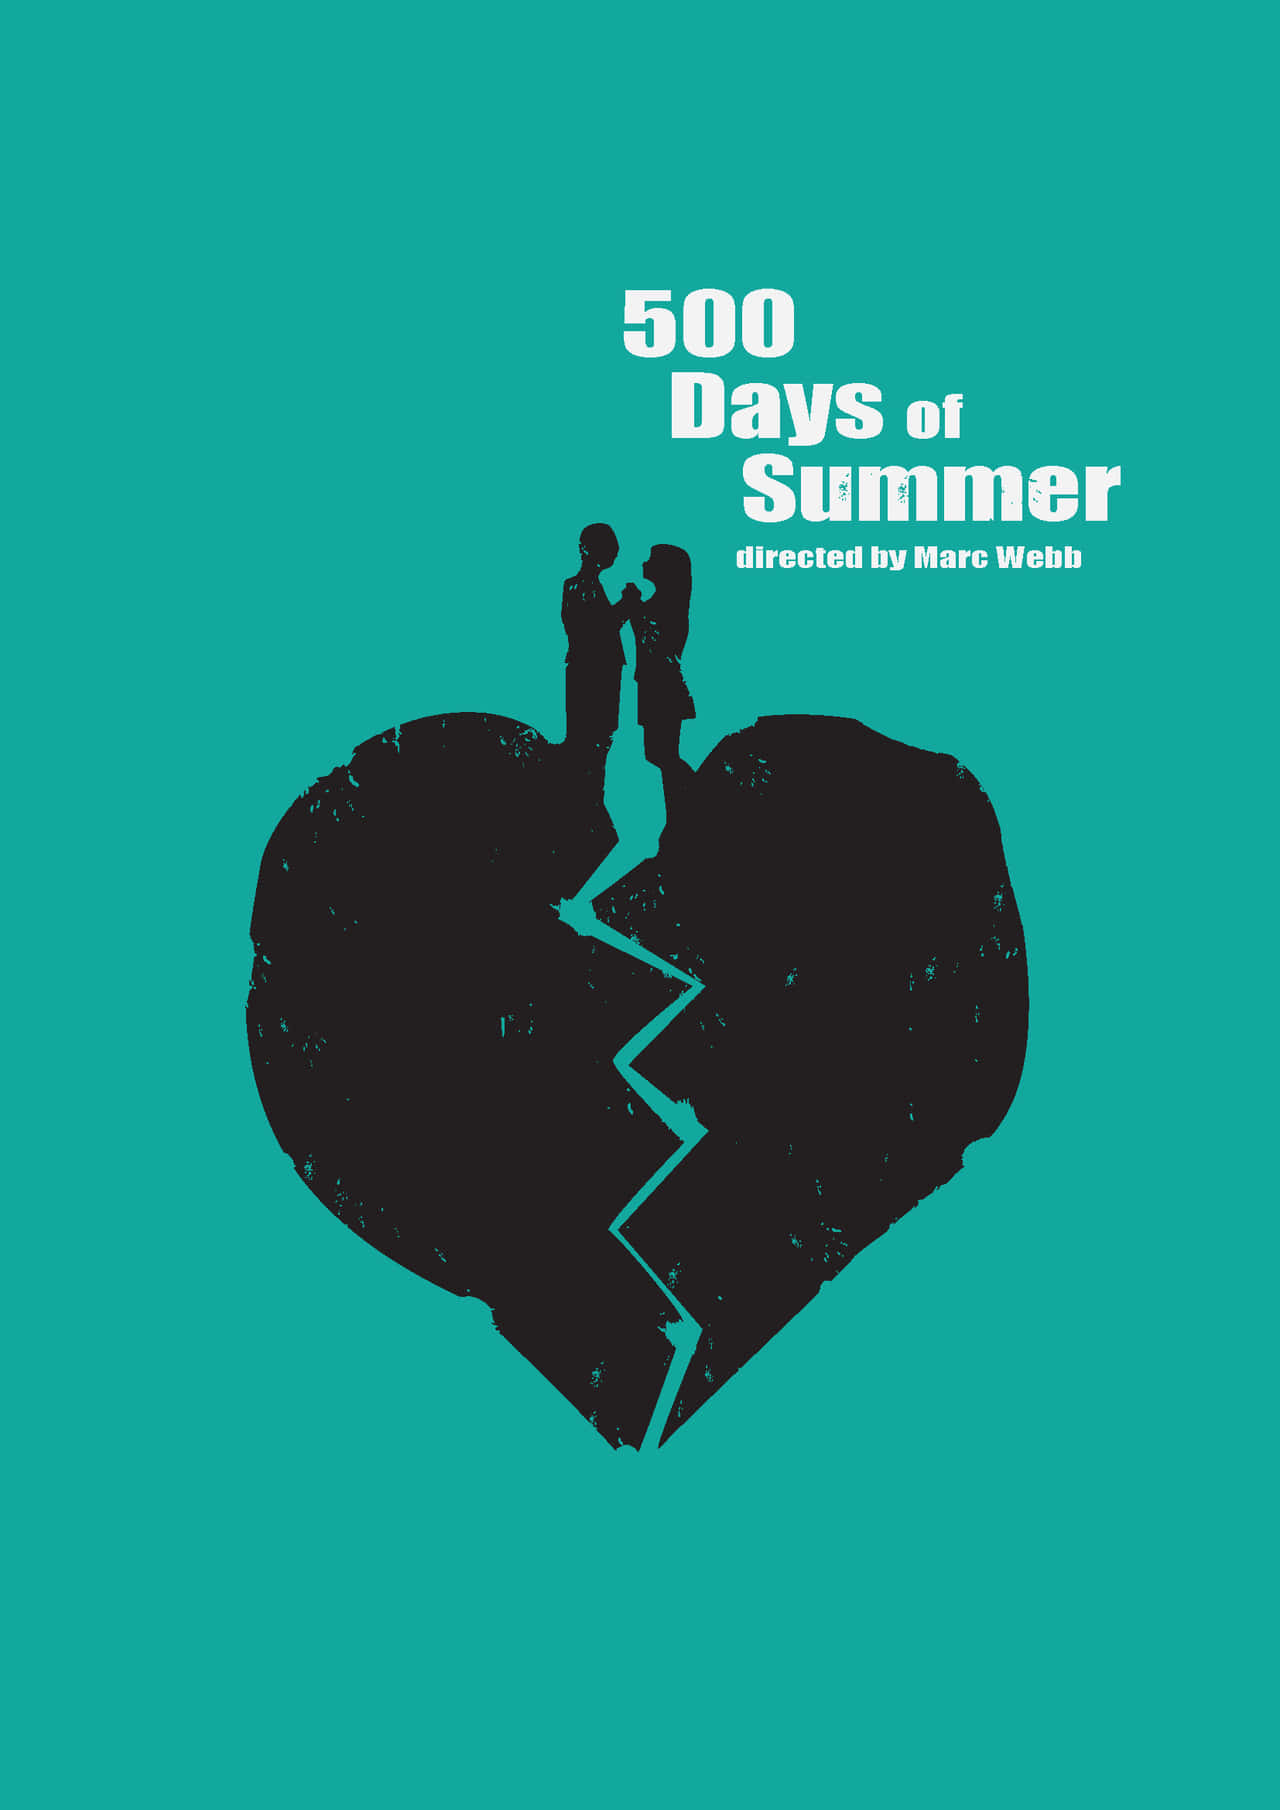 500 days of romance and adventure